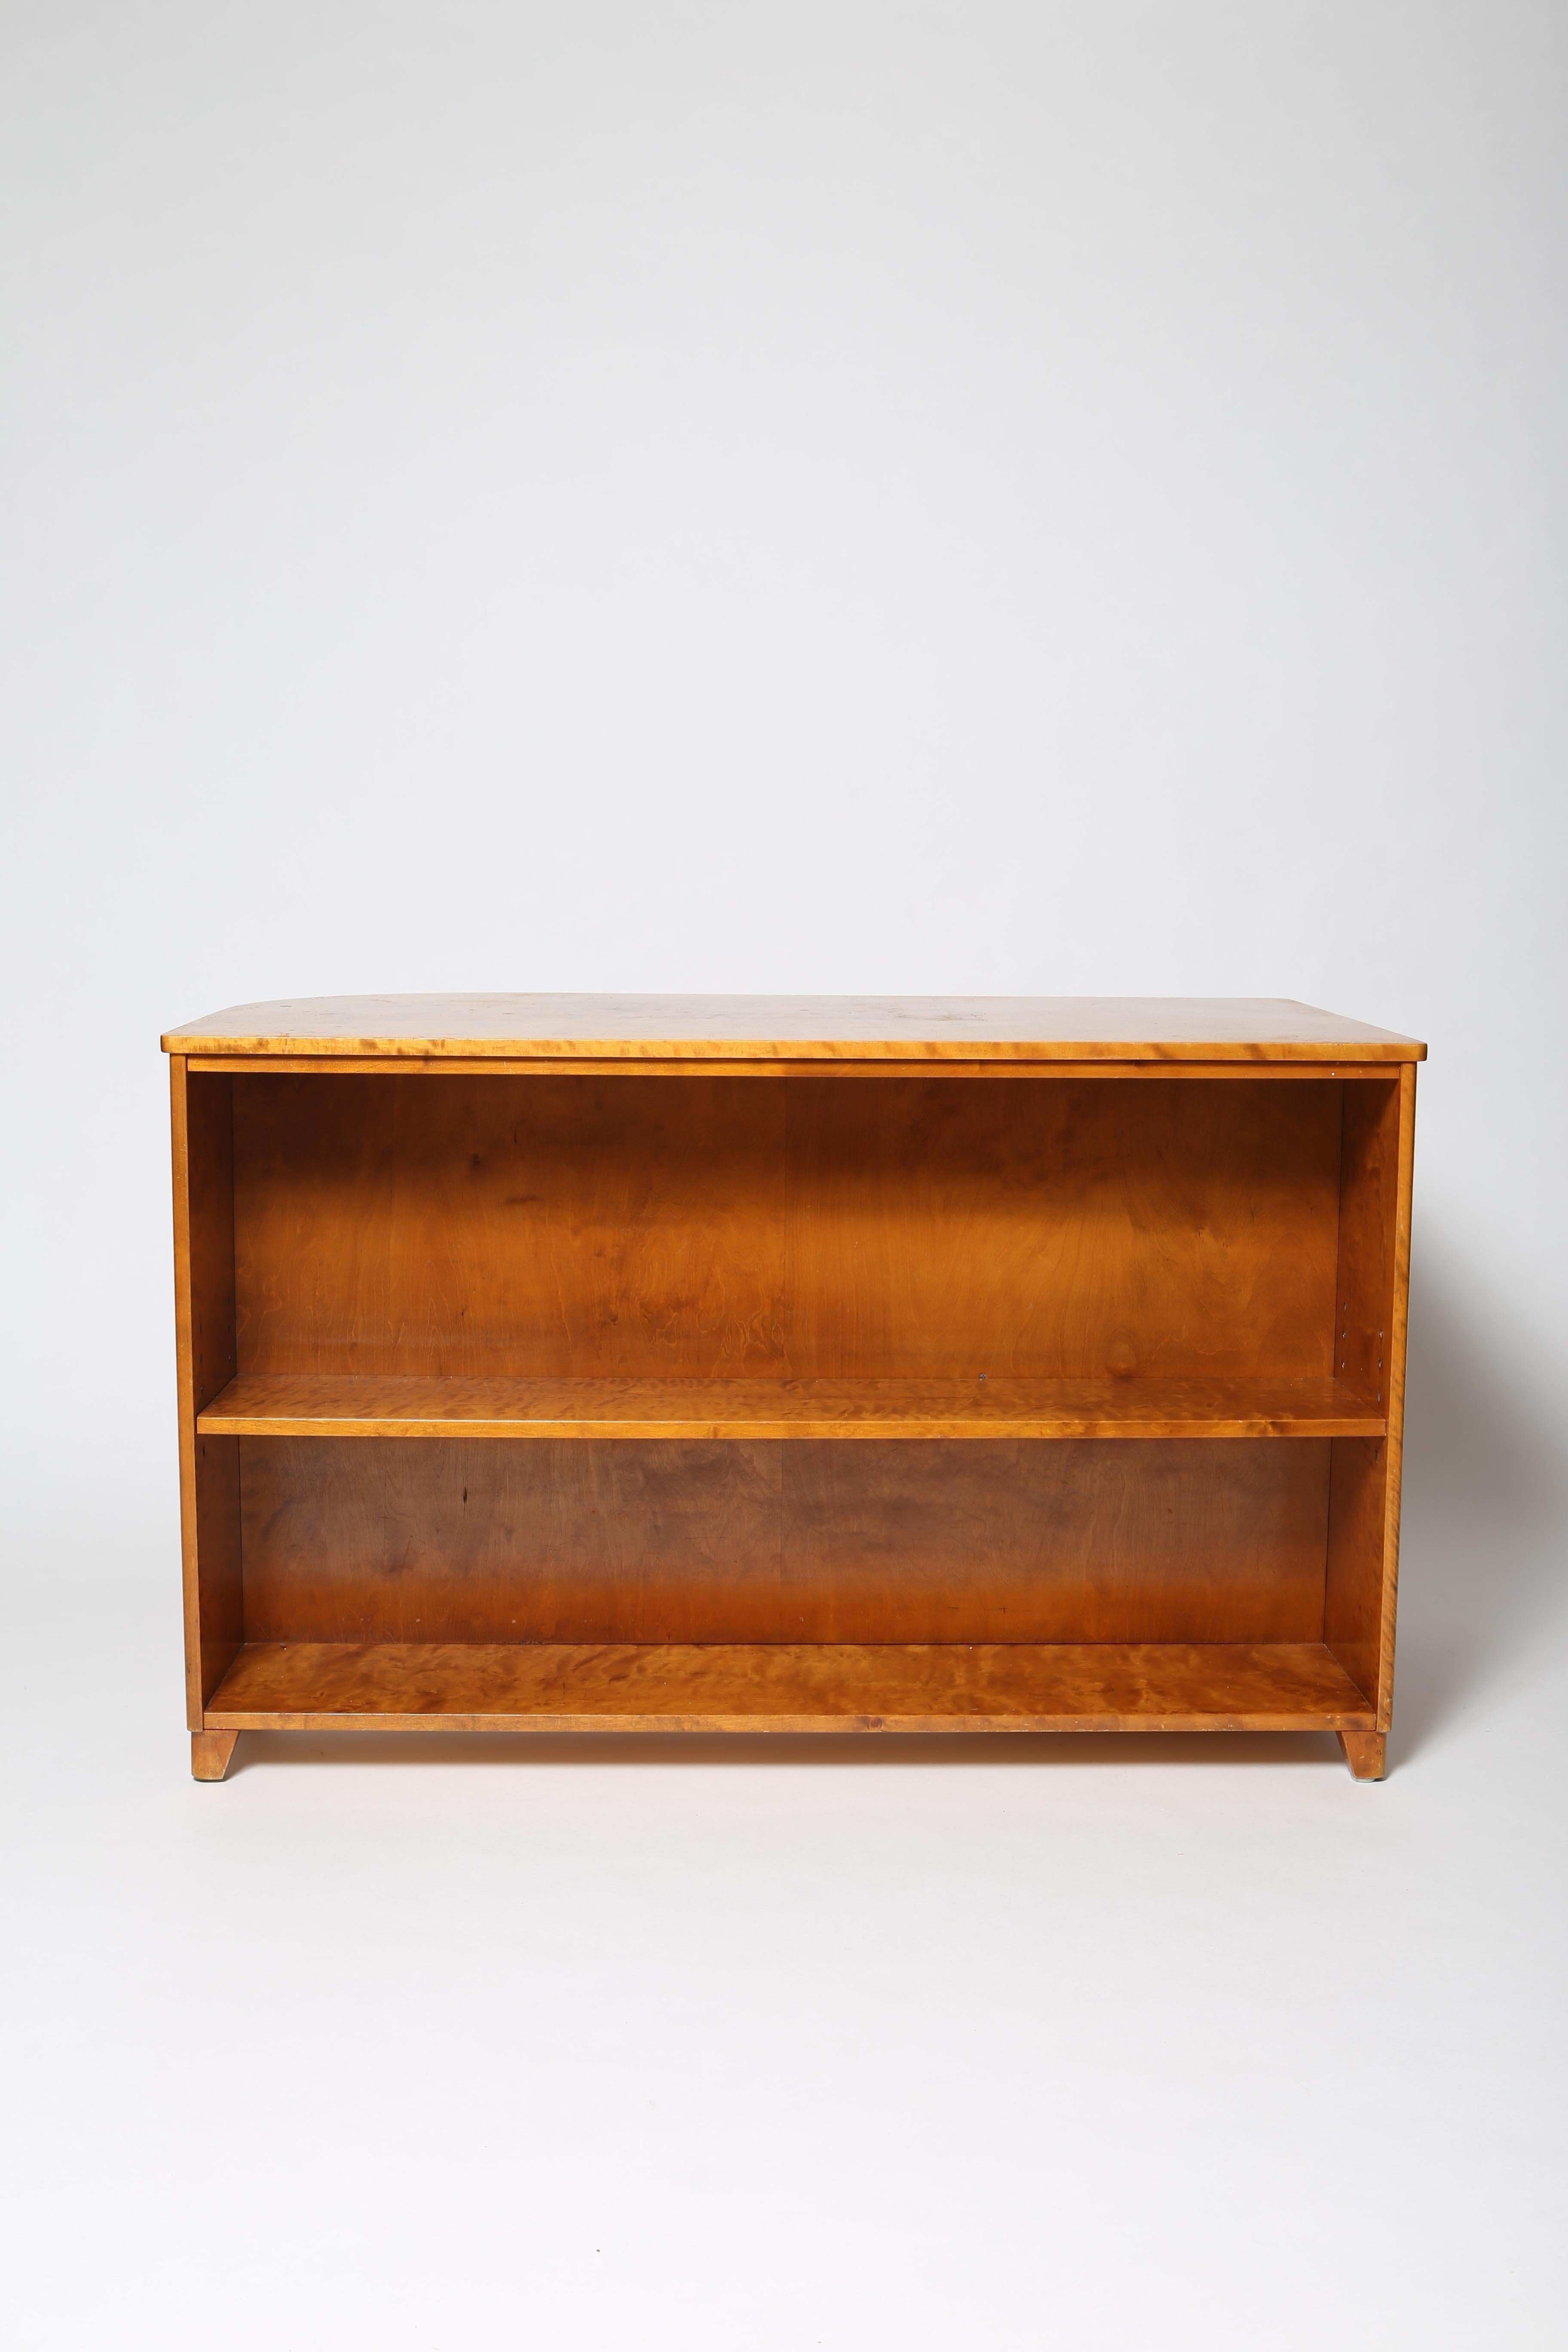 Charming bird’s eye birch veneer over solid beech wood writing desk with exterior bookcase and cabinet at left. In the style of Axel Einar Hjorth or Carl Malmsten, this desk is stamps with the Swedish furniture makers guild mark to interior. The